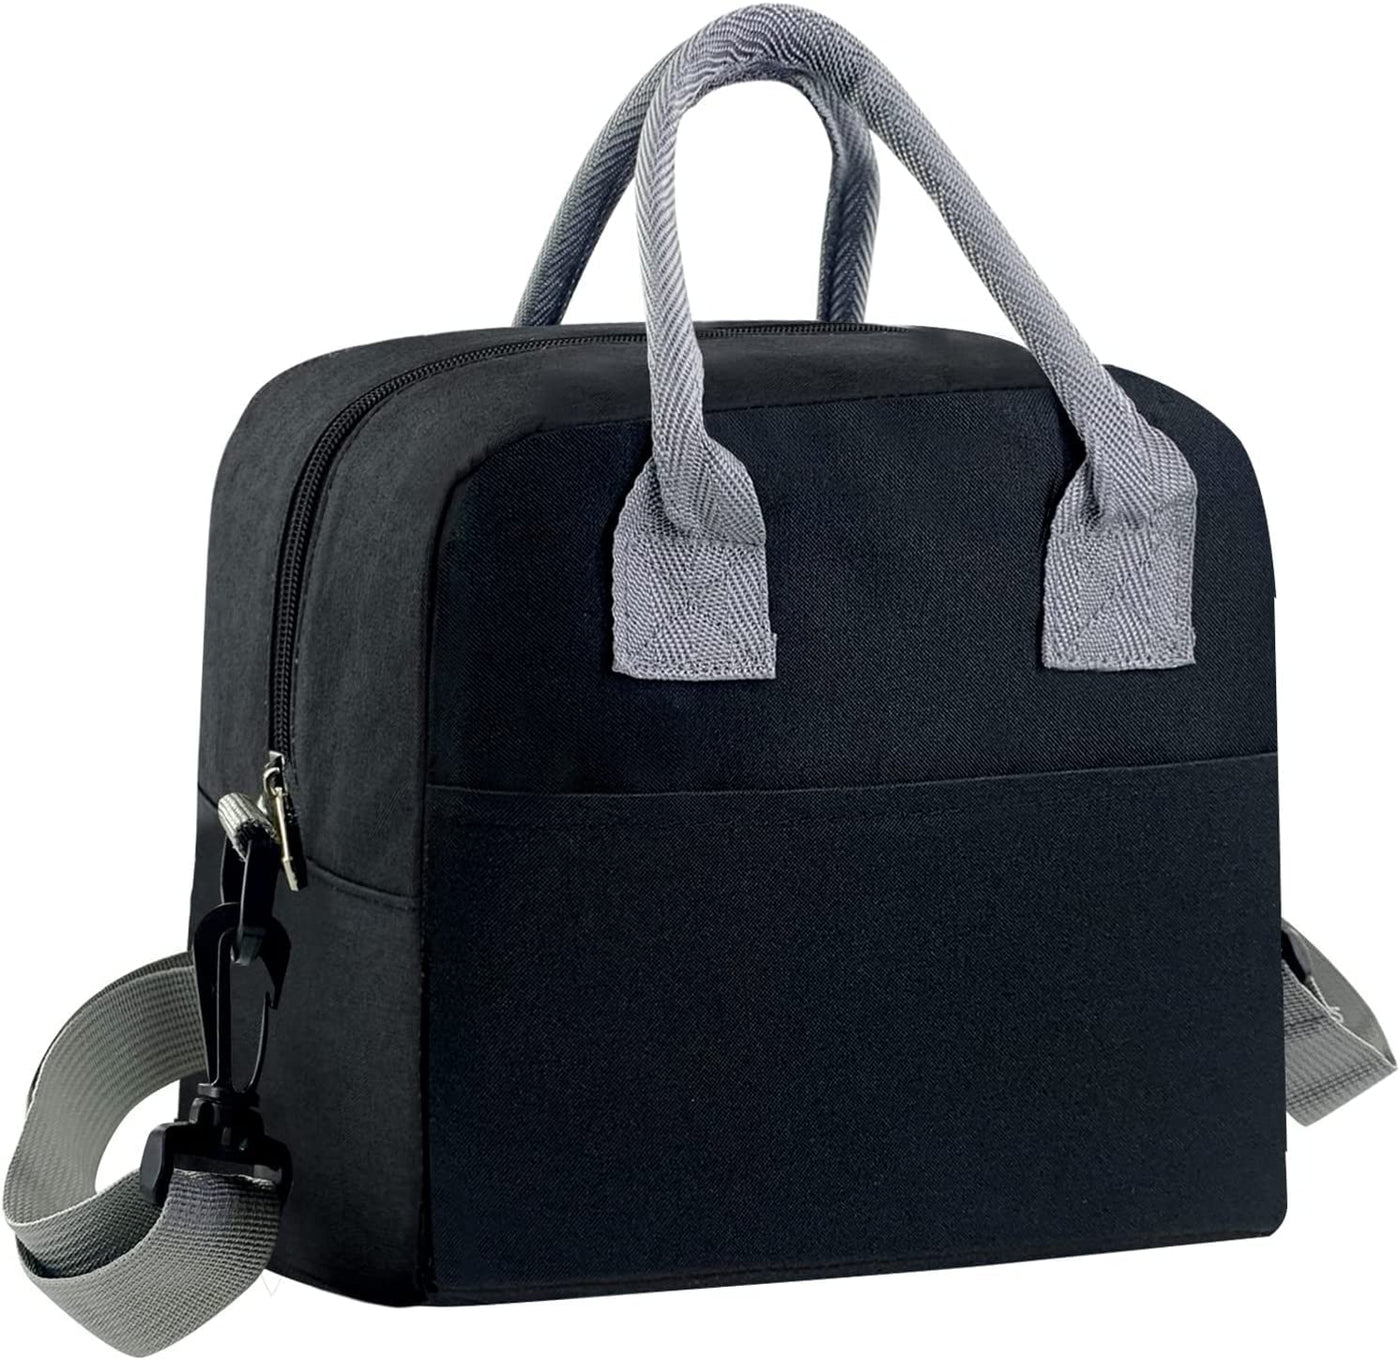 Insulated Large Reusable Lunch Bags with Adjustable & Removable Shoulder Strap